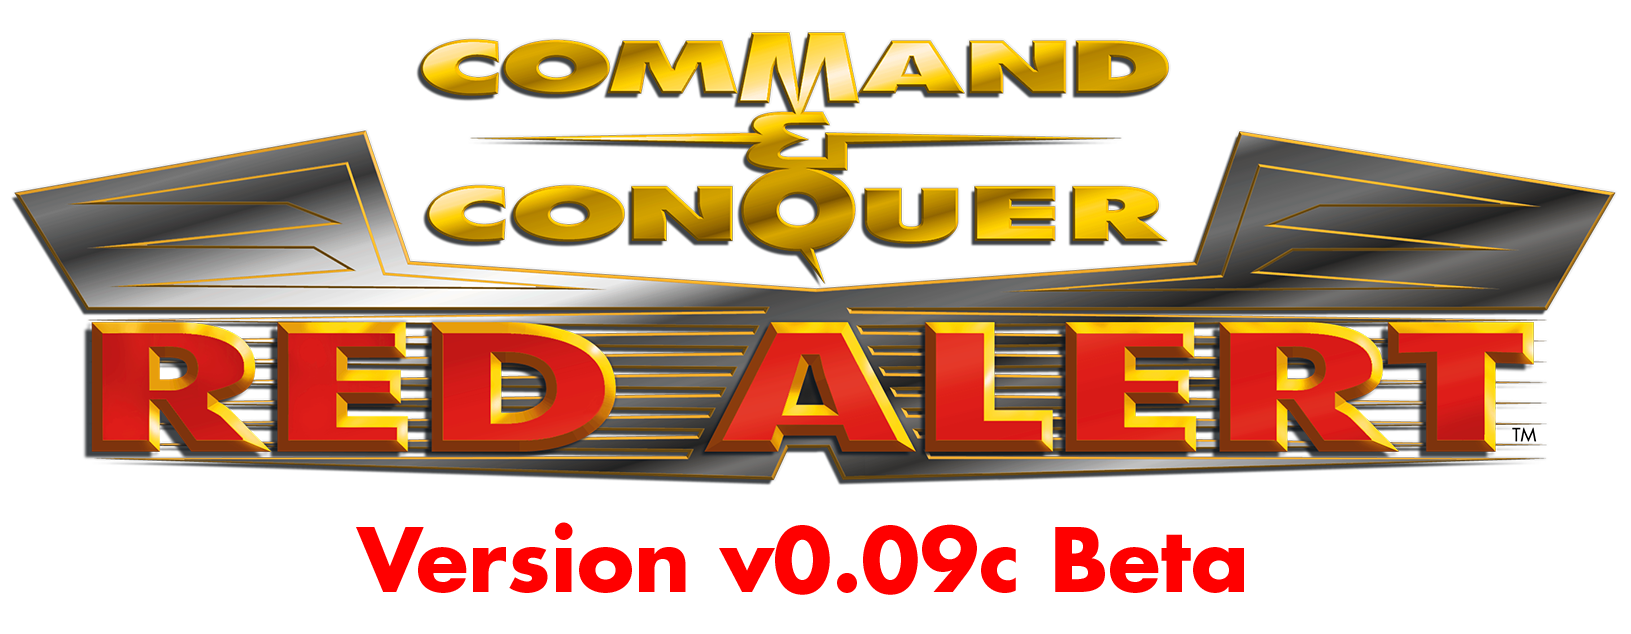 Red Alert beta - Command & Conquer Wiki - covering Red Alert and Generals universes